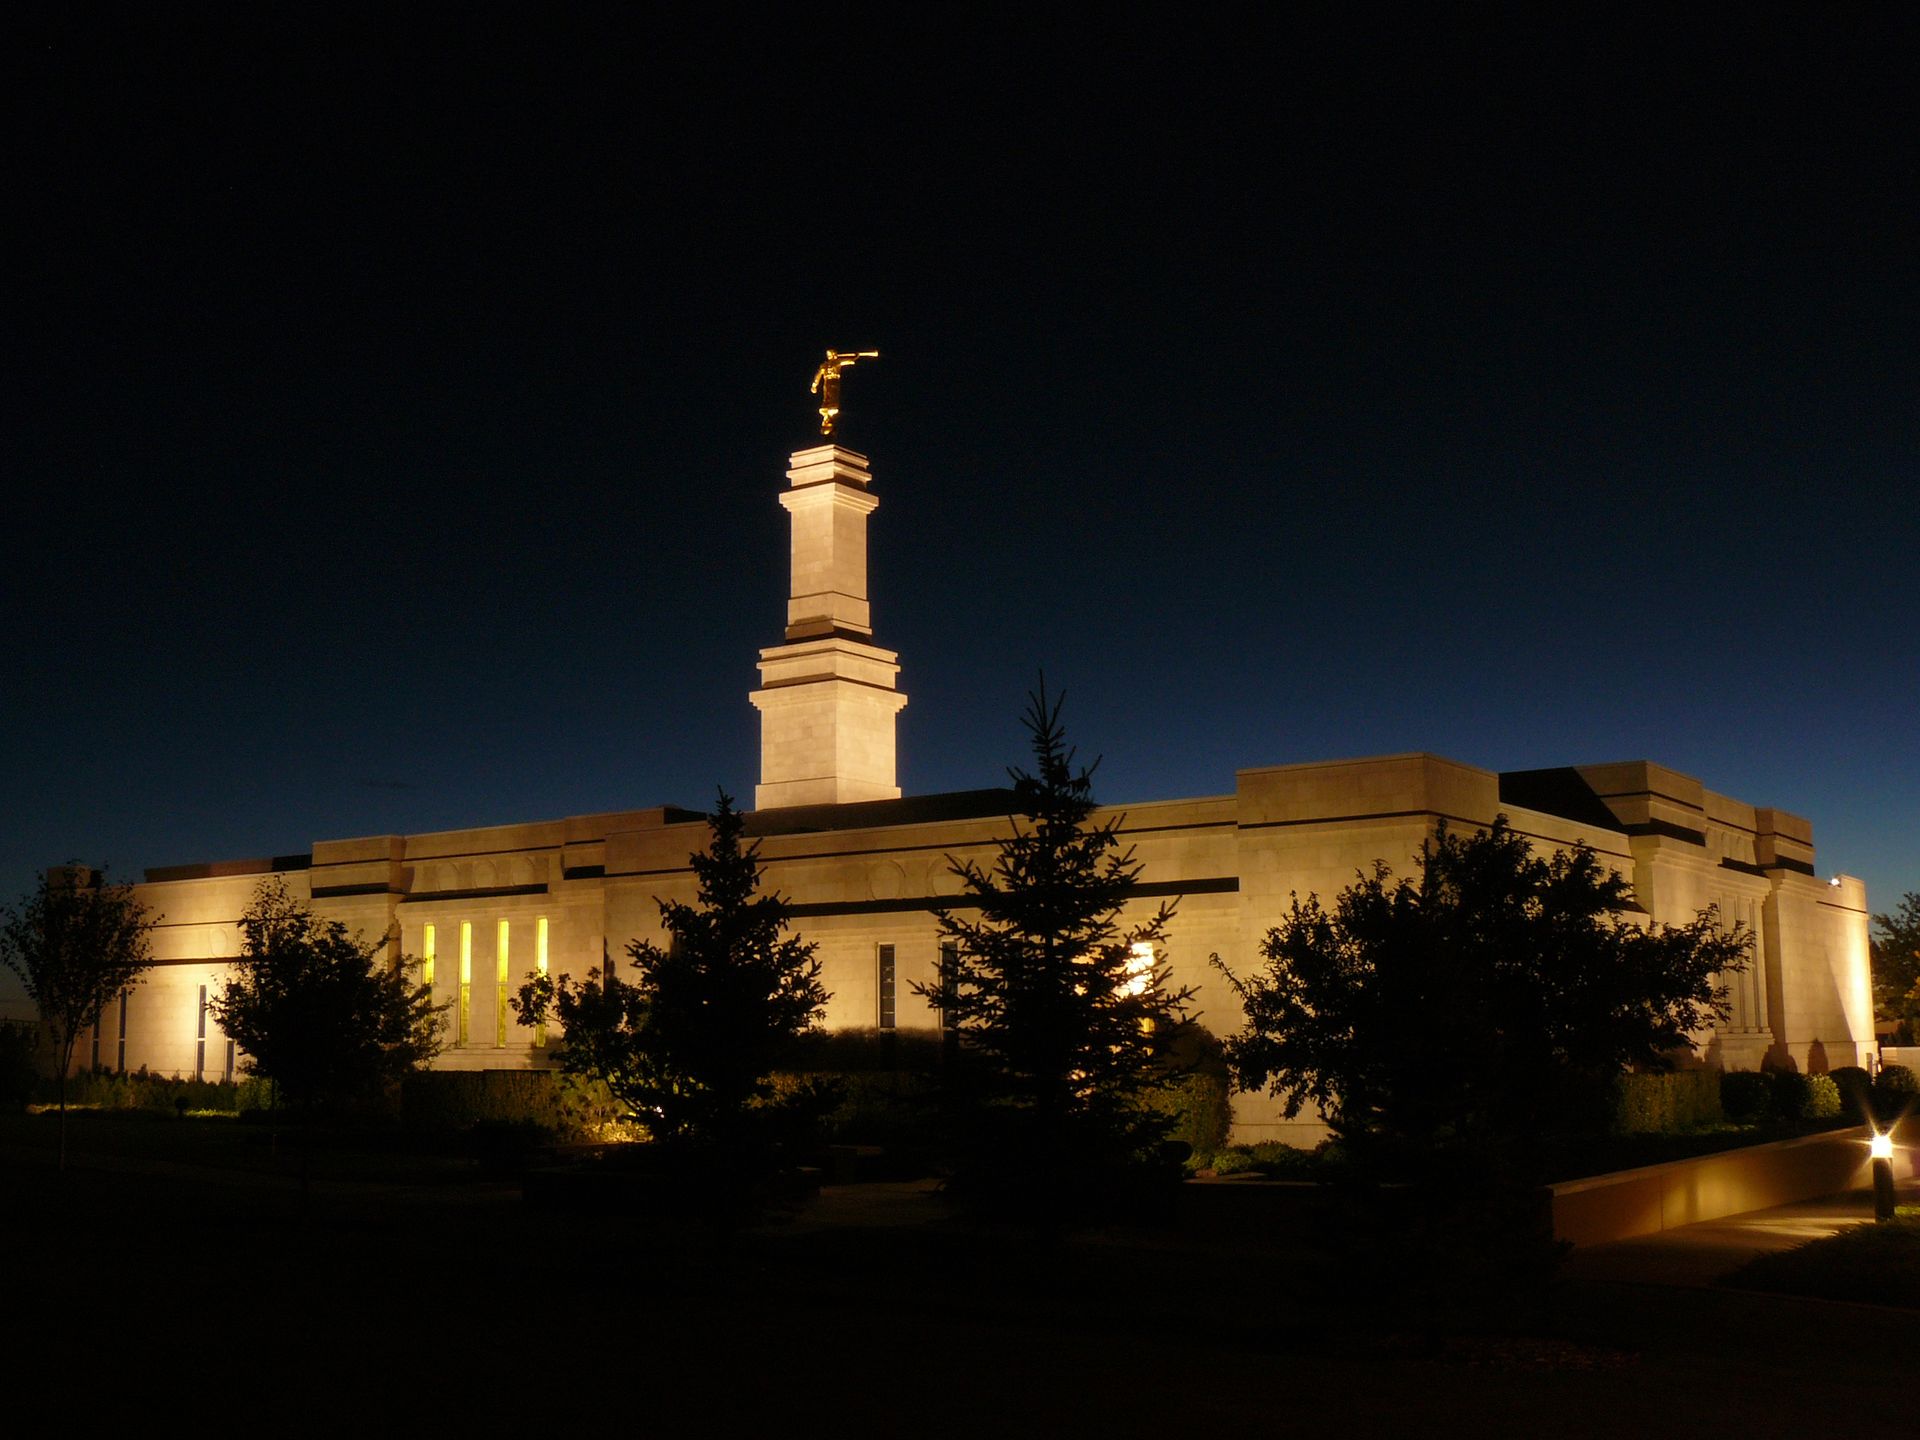 The Monticello Utah Temple in the evening, including scenery.